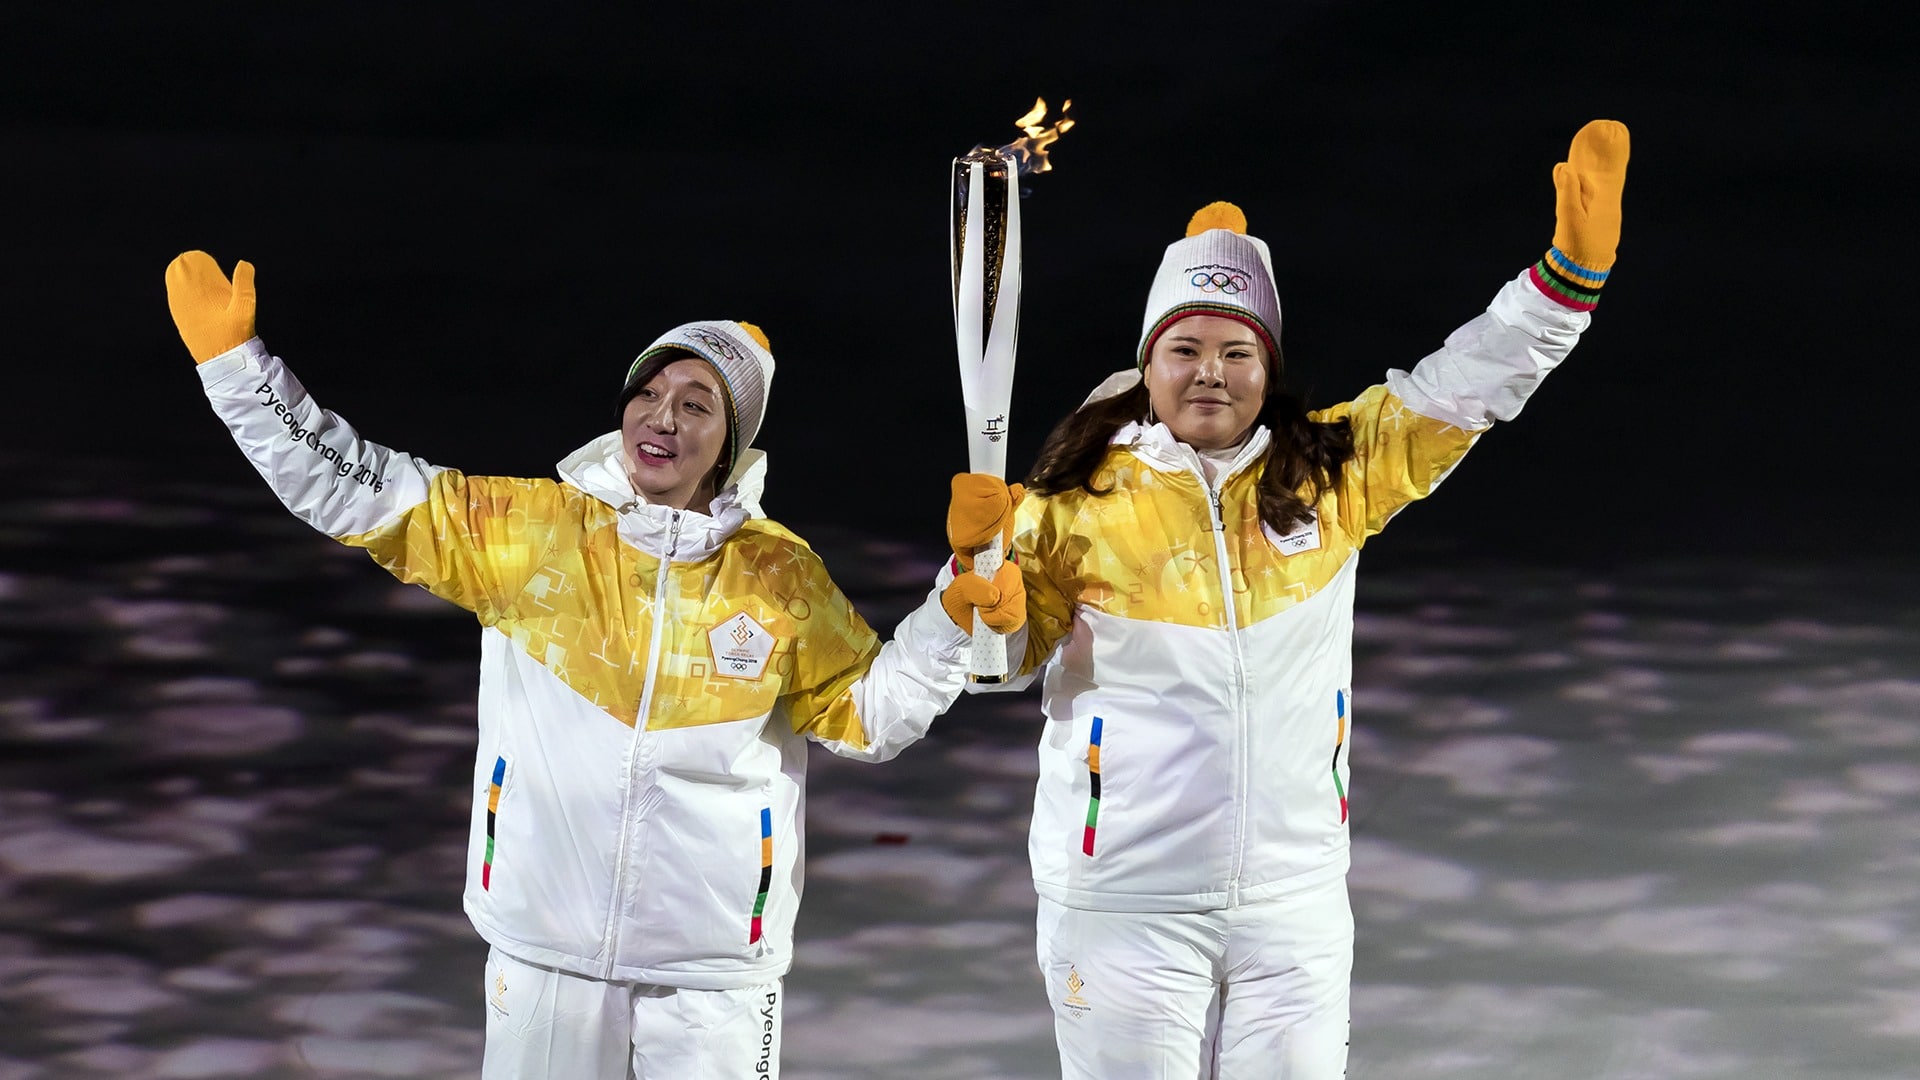 PyeongChang 2018 Winter Olympic and Paralympic Gold Medal Winners